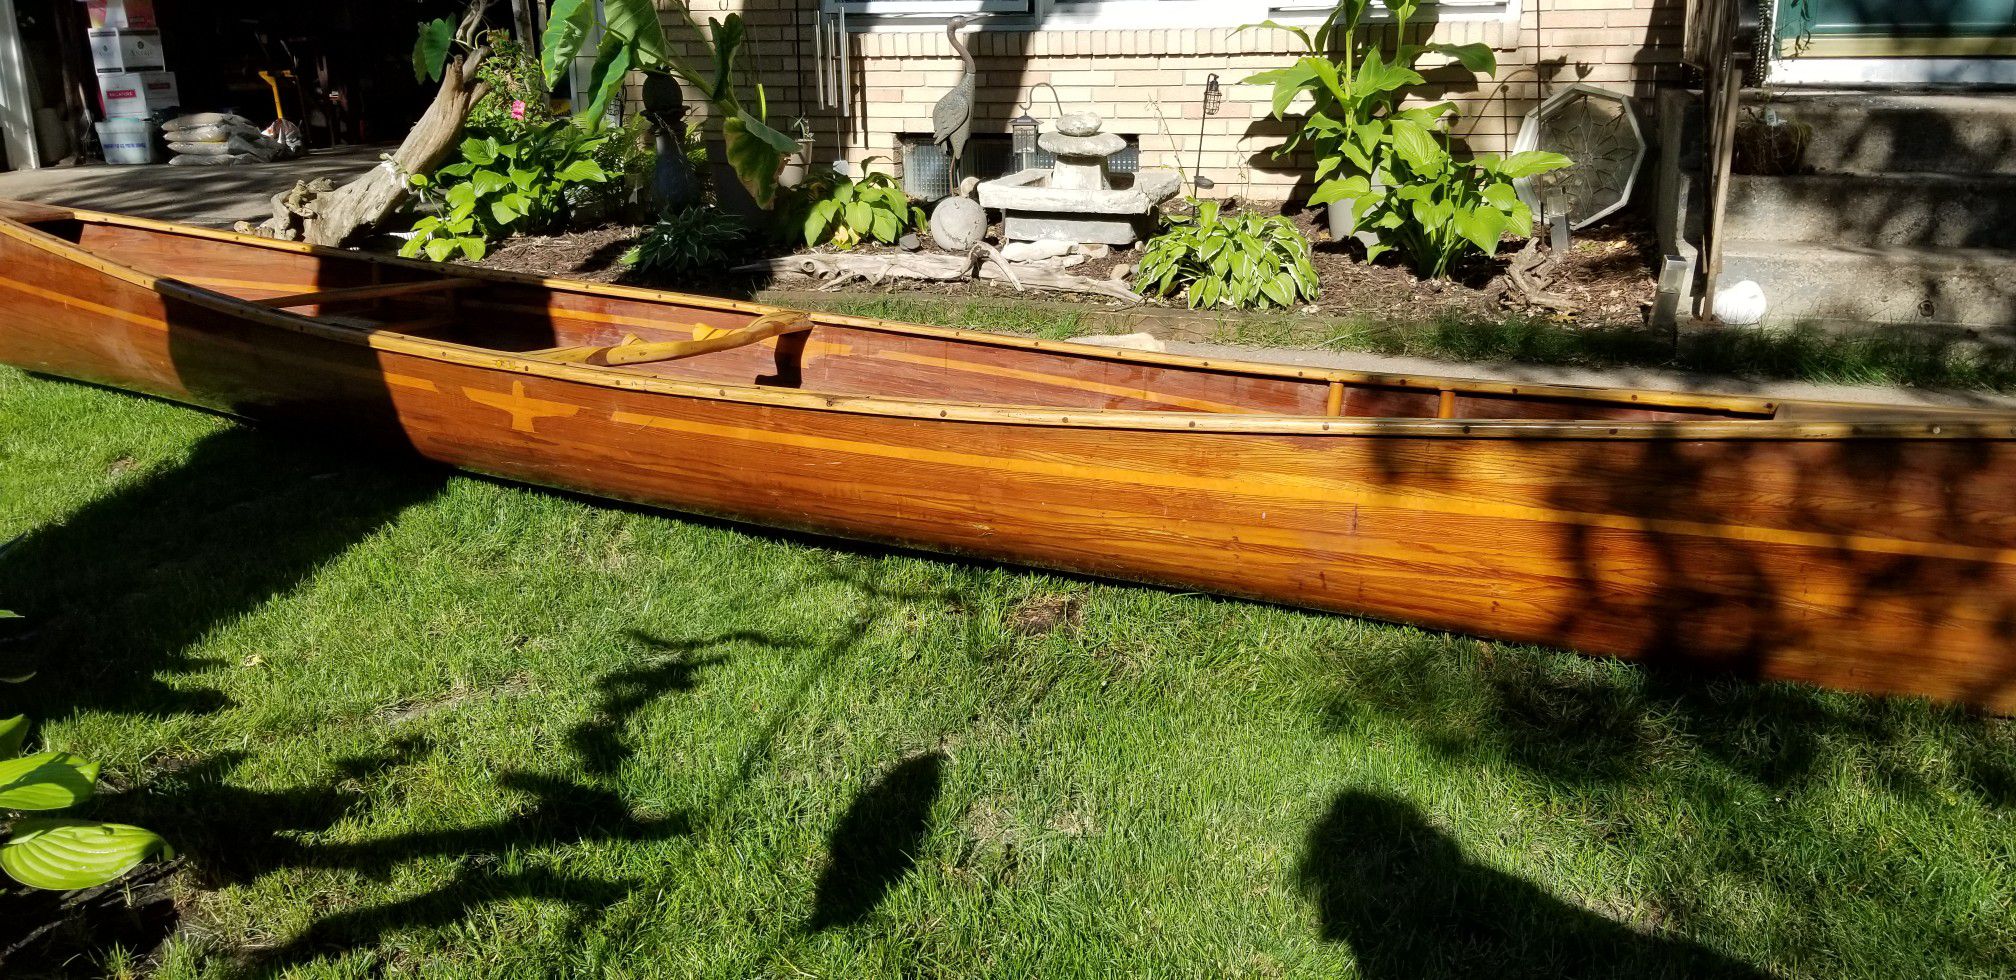 18' beautiful cedar strip canoe please note this app isn't working right if you've messaged me it deleted all context. Please send again.